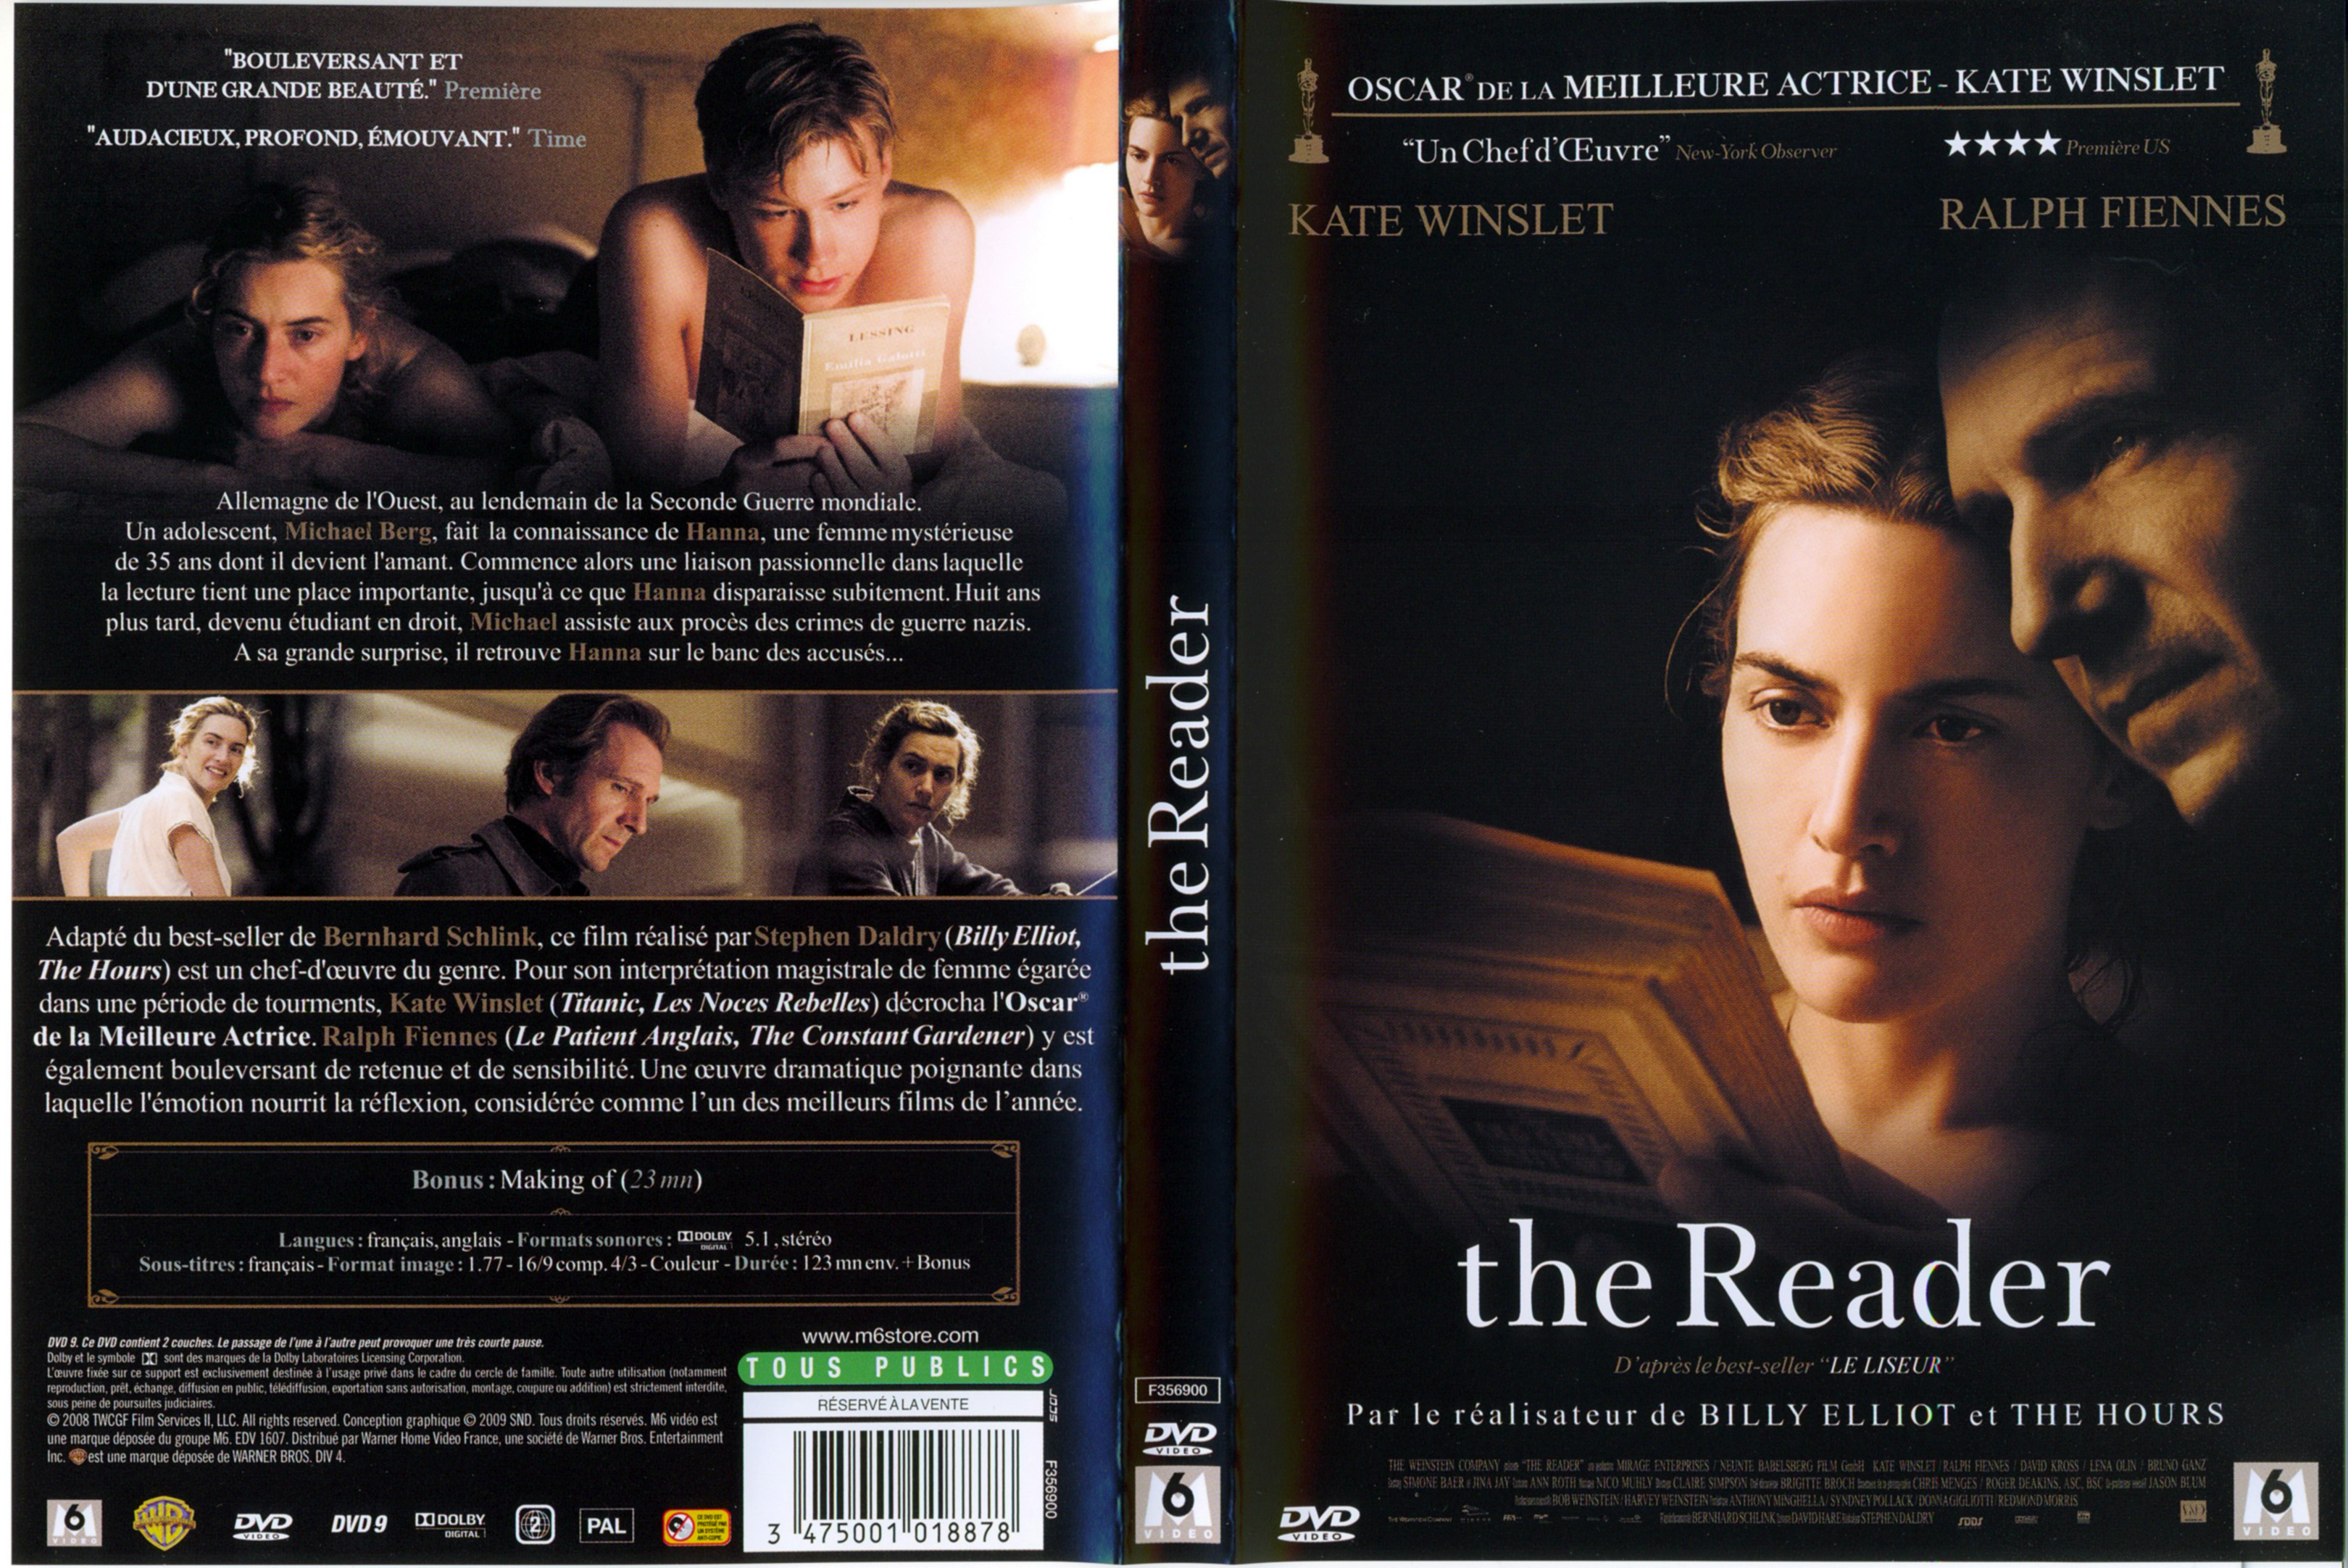 Jaquette DVD The reader